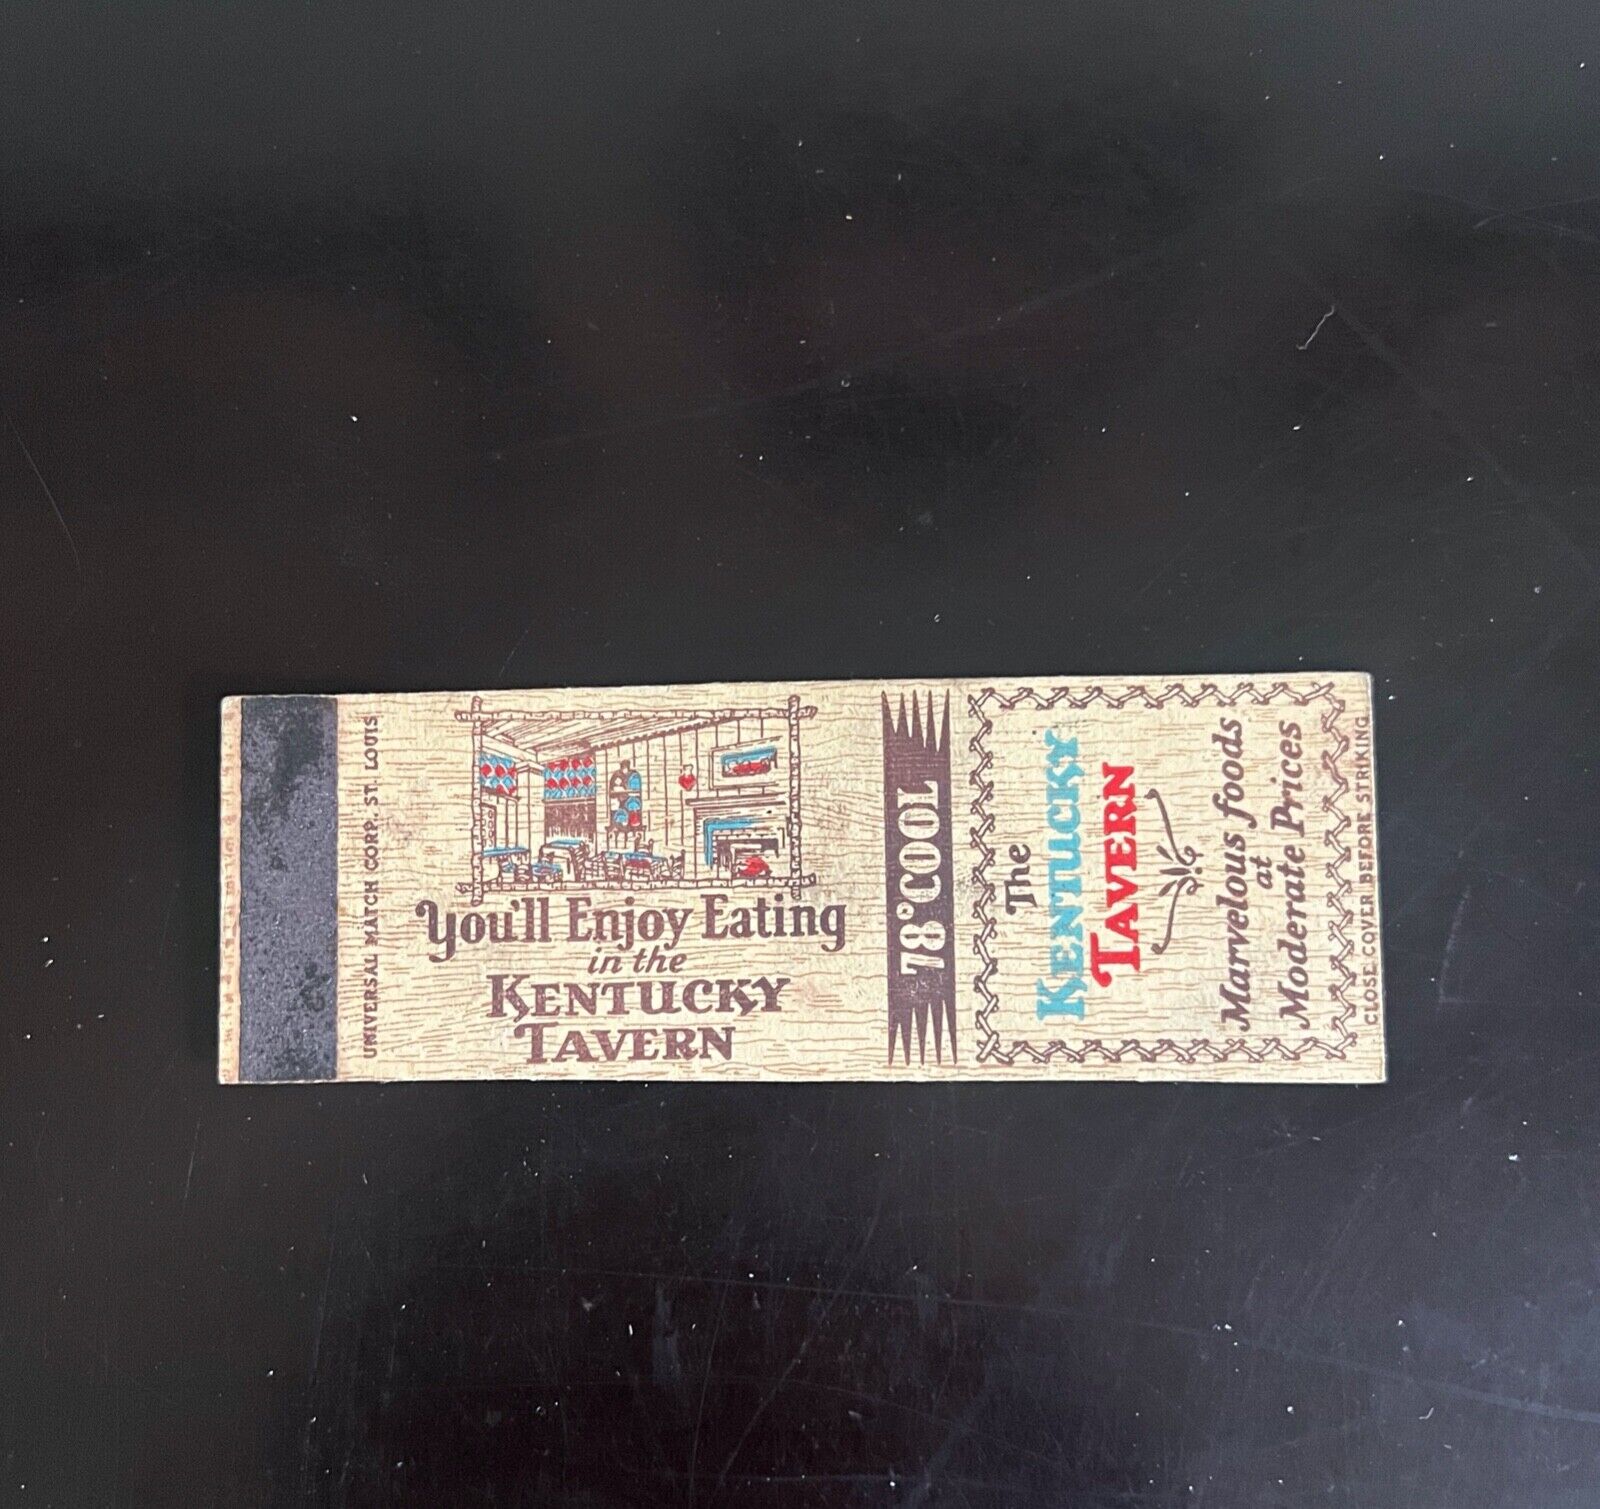 Vintage Sample Matchbook Cover - You\'ll Enjoy Eating in the Kentucky Tavern